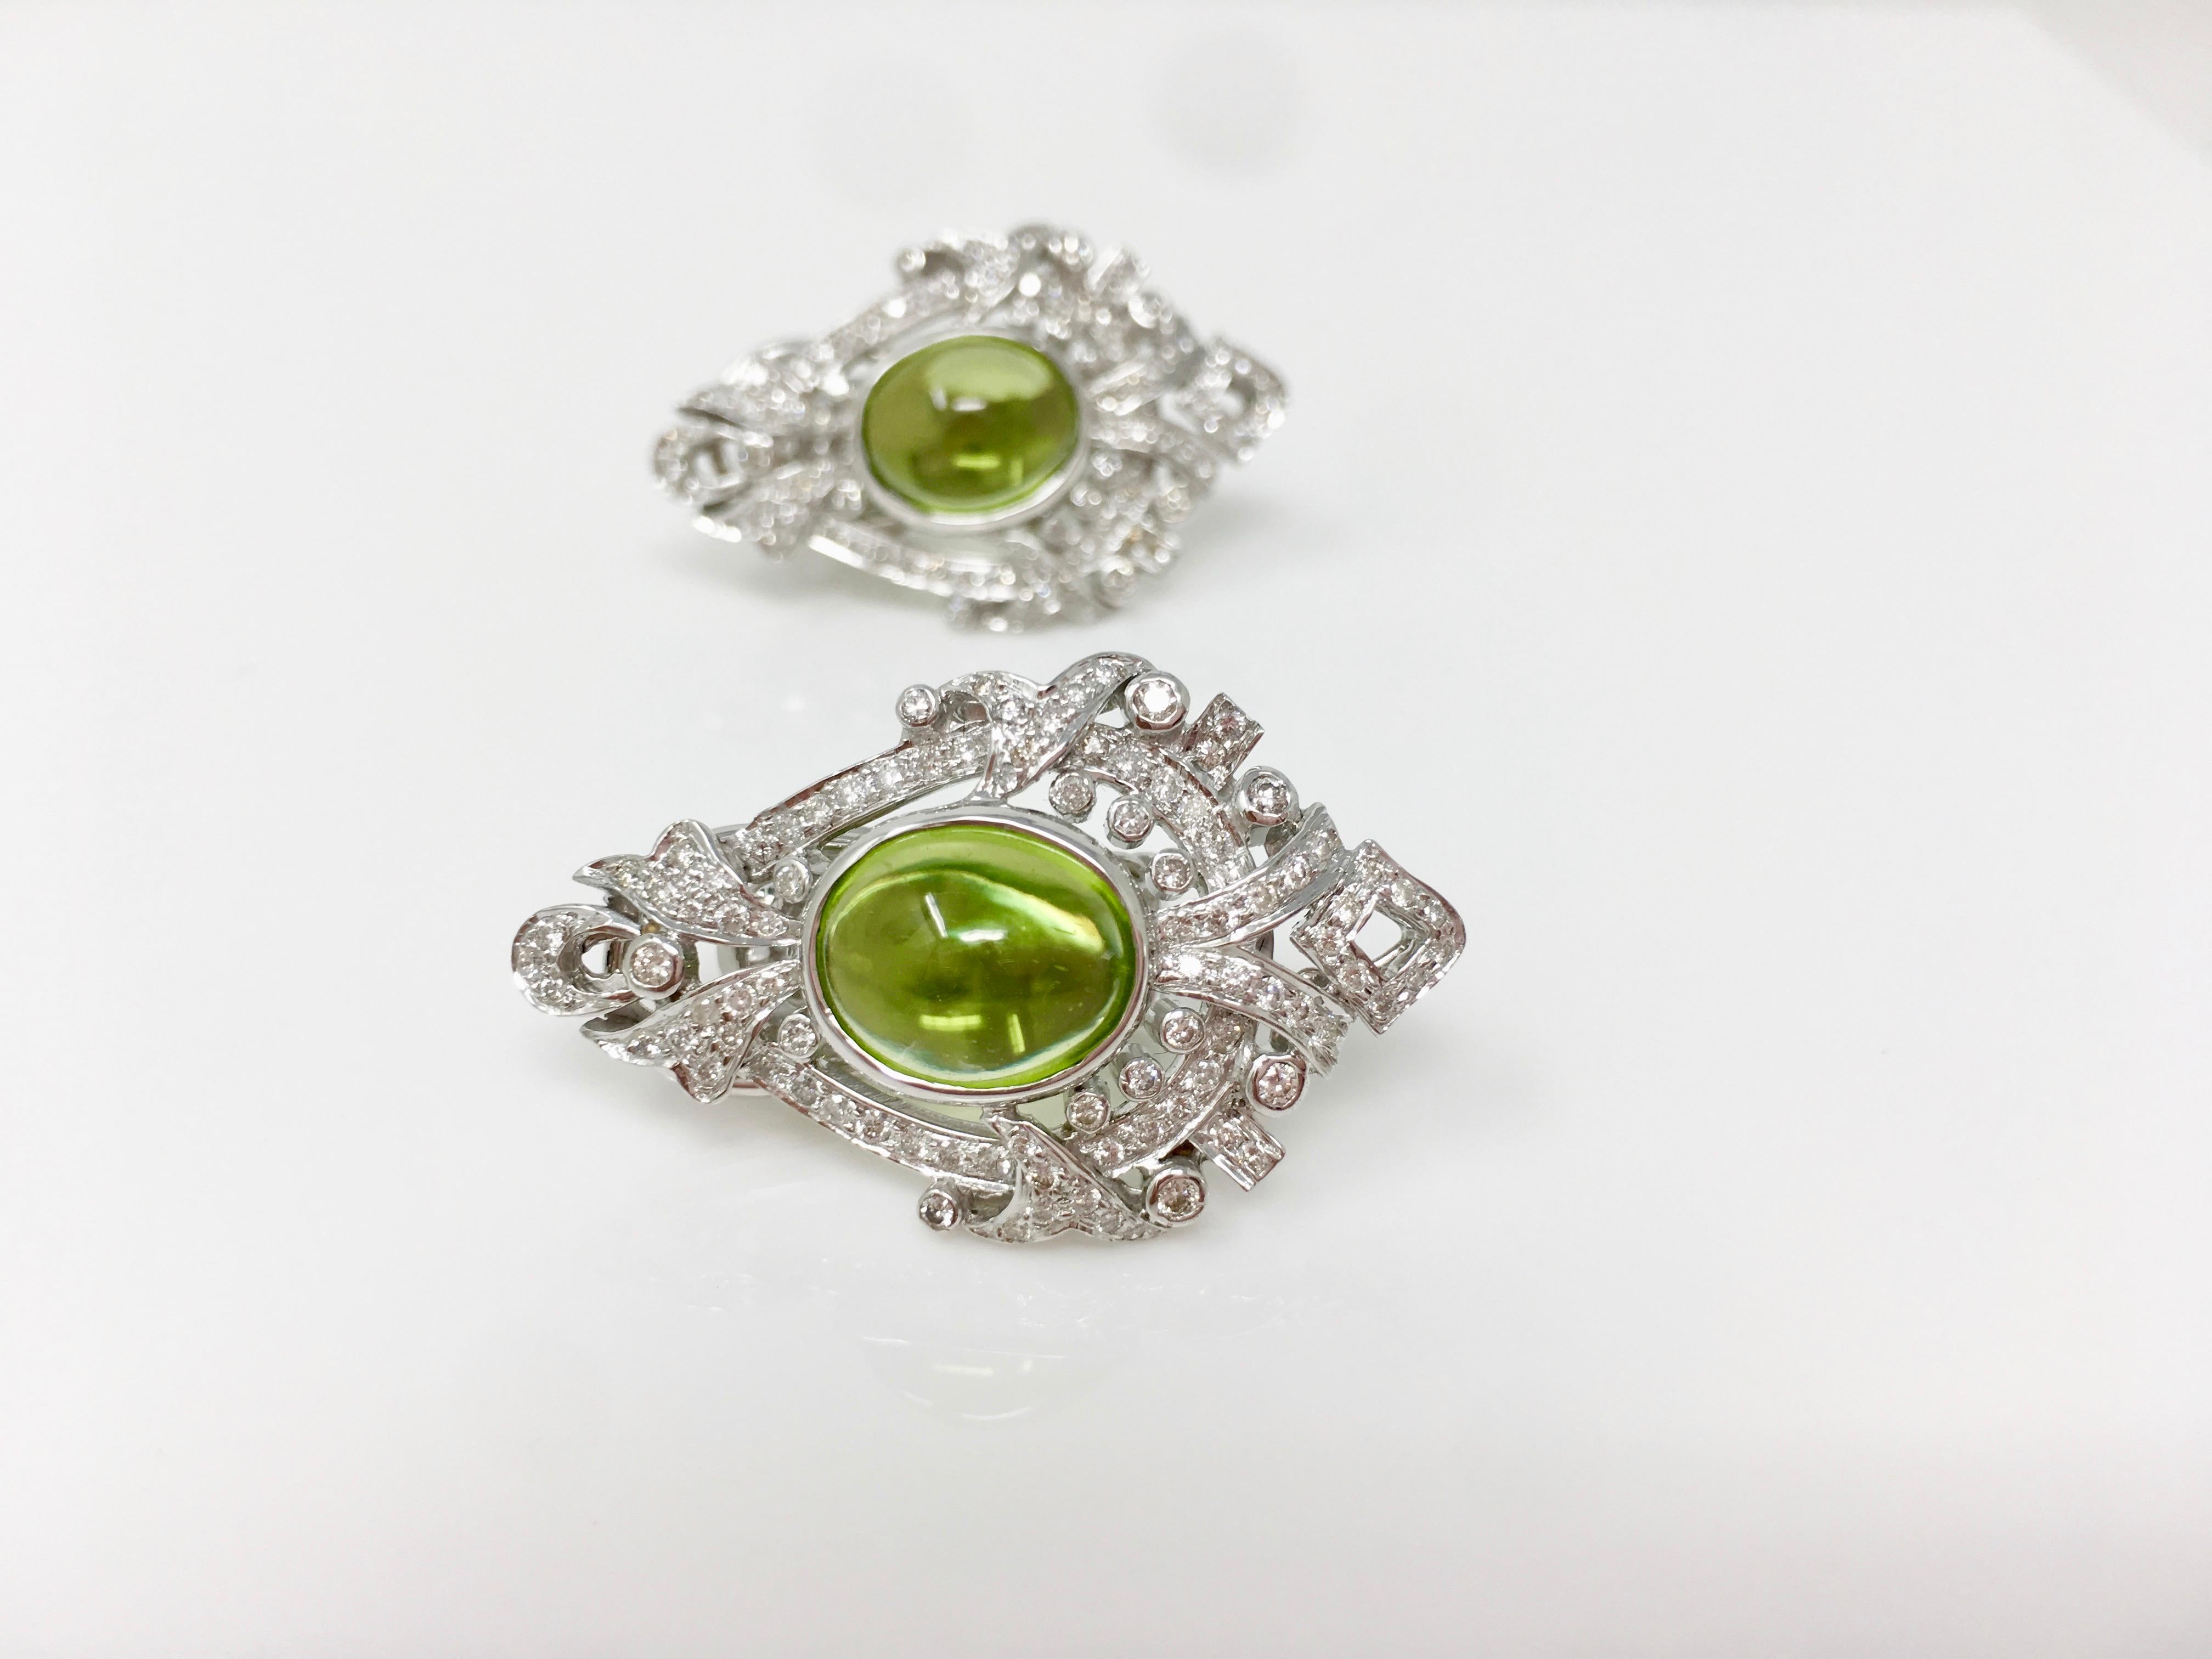 Diamond and peridot stud earrings handmade in 18K white gold.
The details are as follows : 
Diamond weight : 1.52 carat approx ( GH color and VS clarity ) 
Peridot weight : 8.70 carat approx
Measurements : 1.30inches long and 1 inch wide 
Metal :